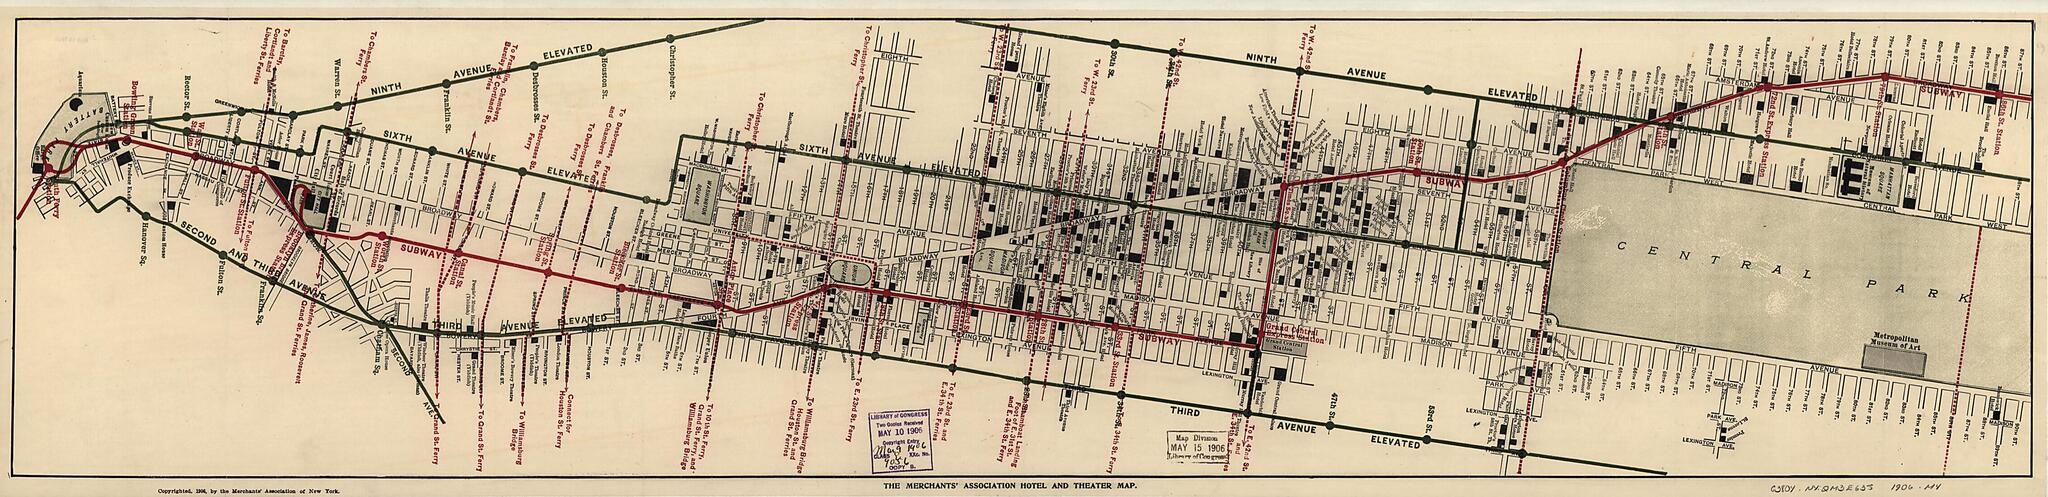 This old map of The Merchants&